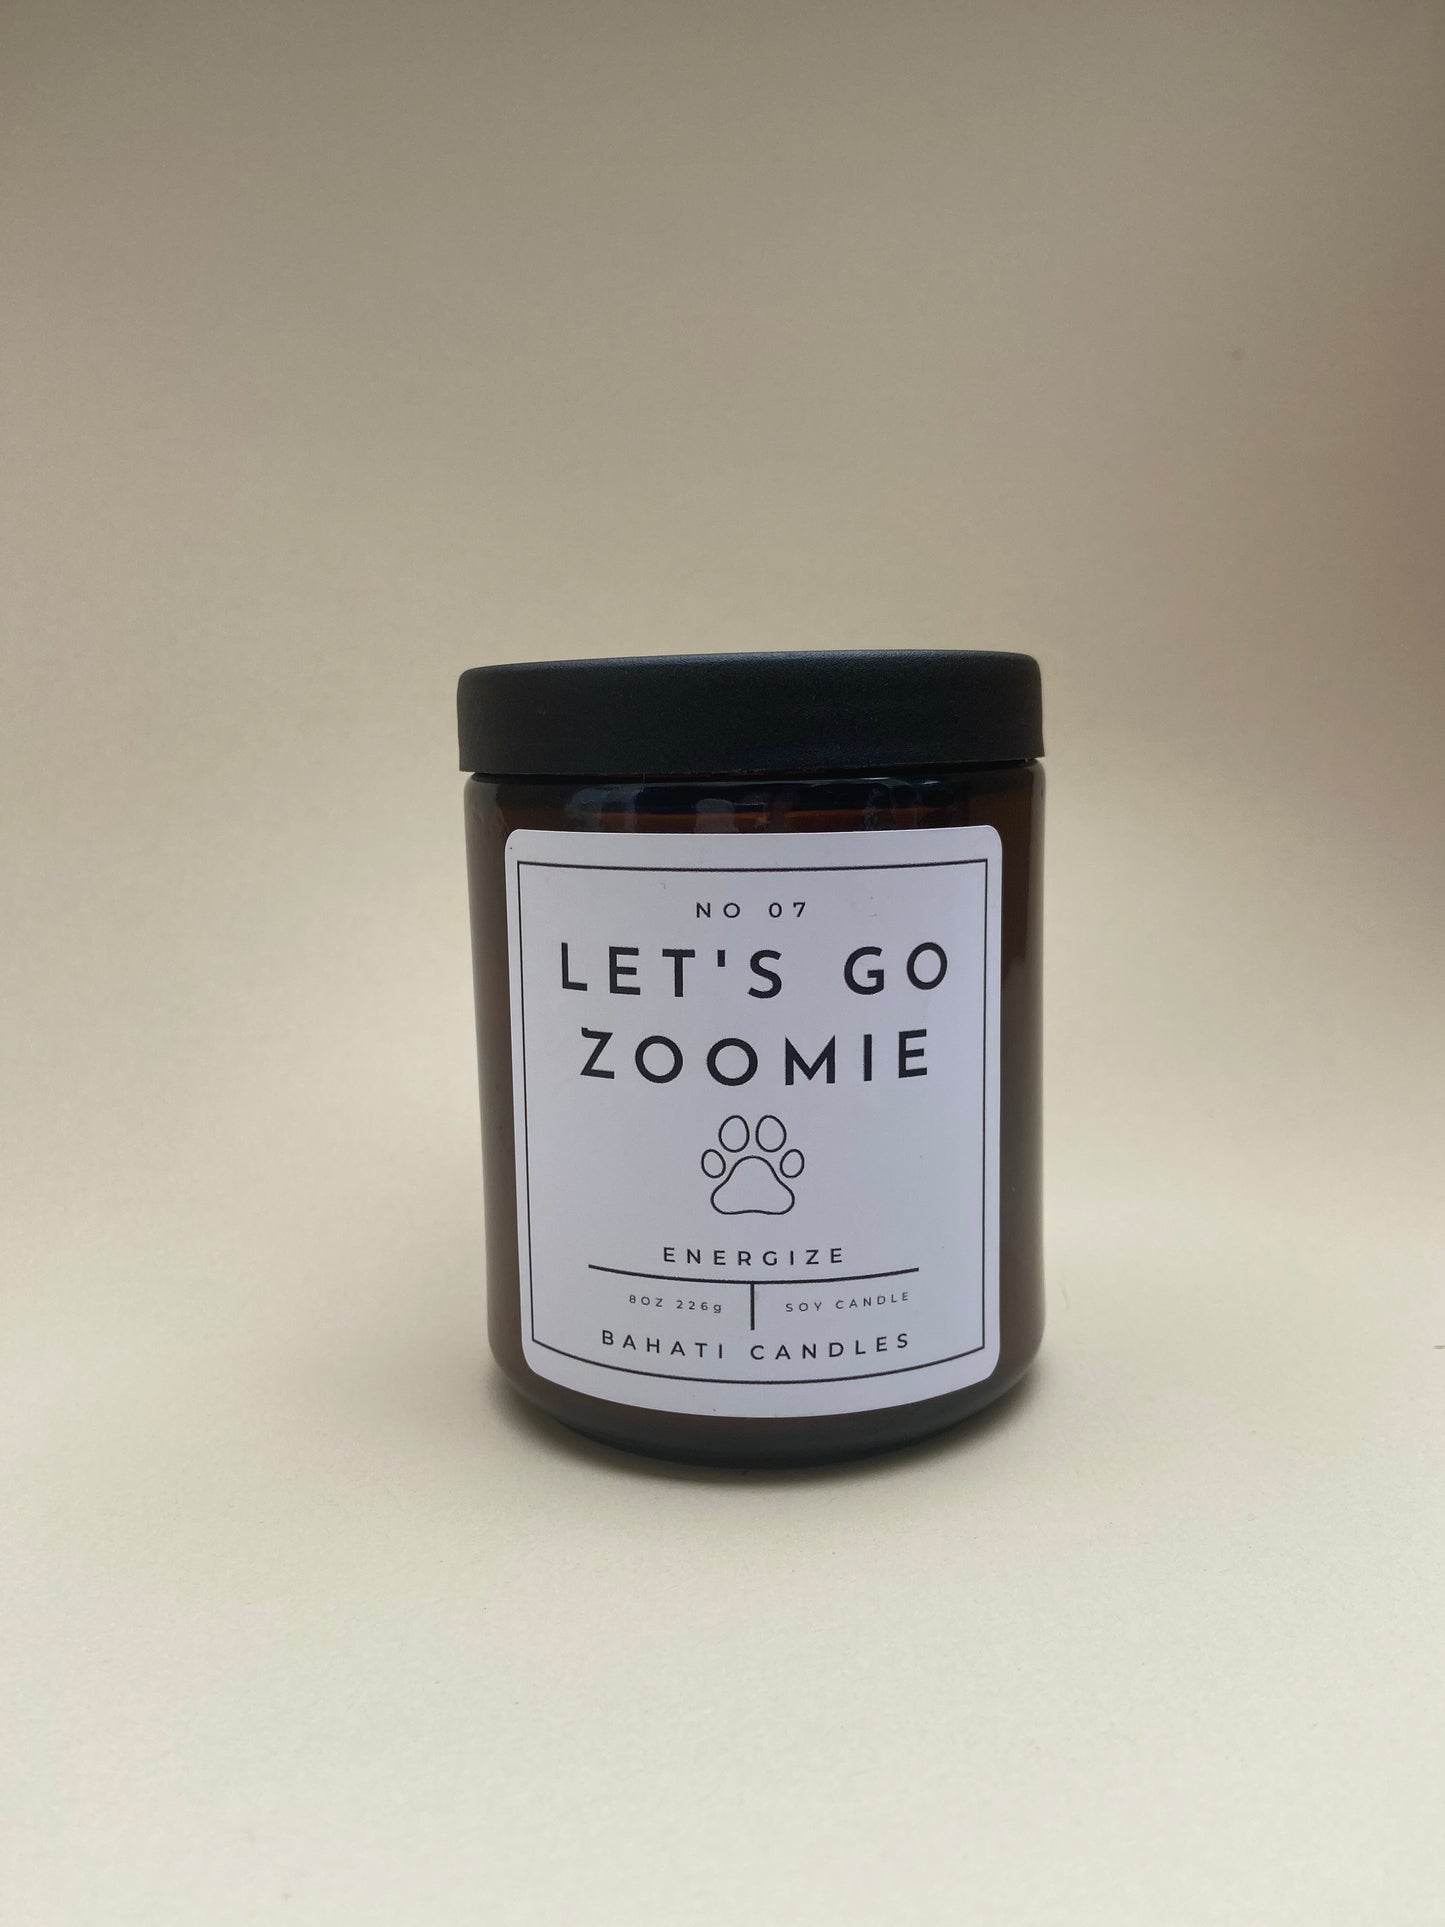 Let's Go Zoomie- 8 ounce candle